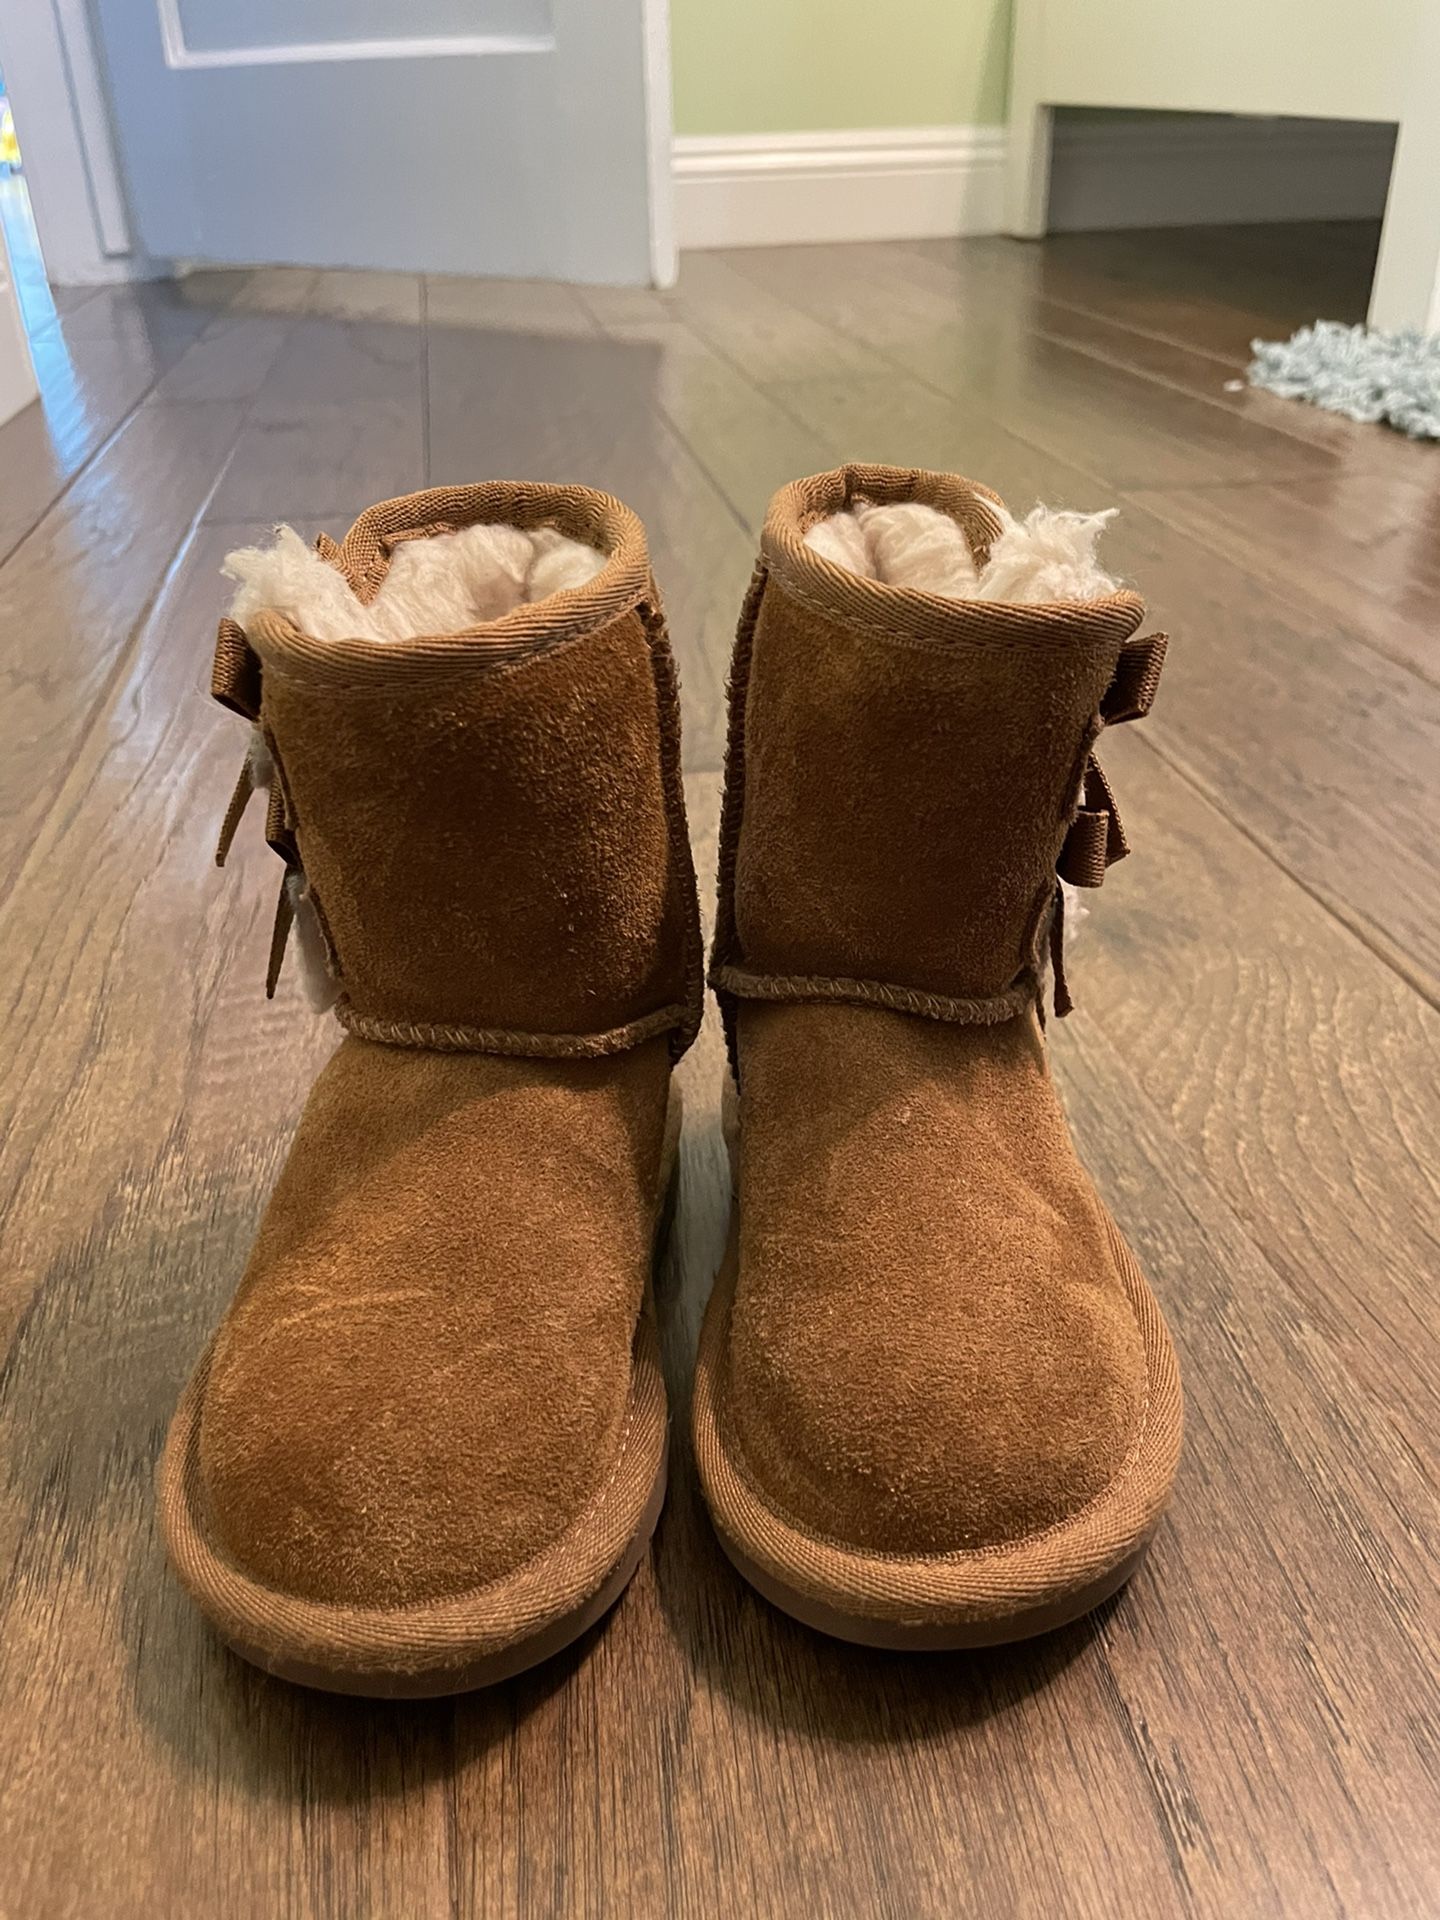 Toddler Ugg Boots 5c